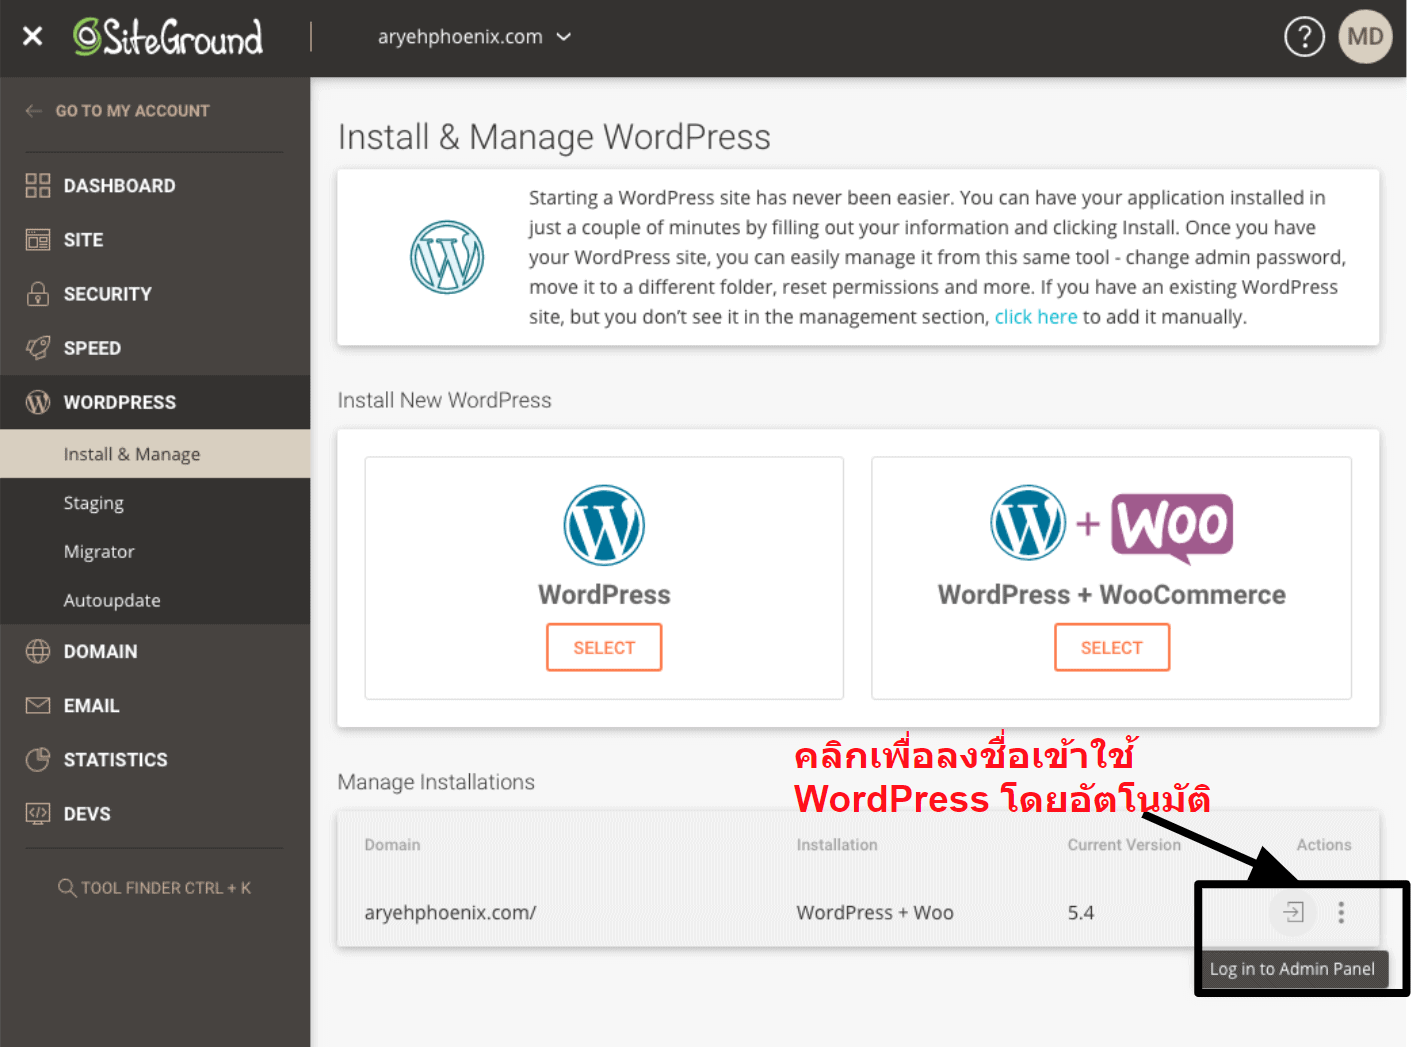 SiteGround offers a one click login option for your WordPress dashboard TH15